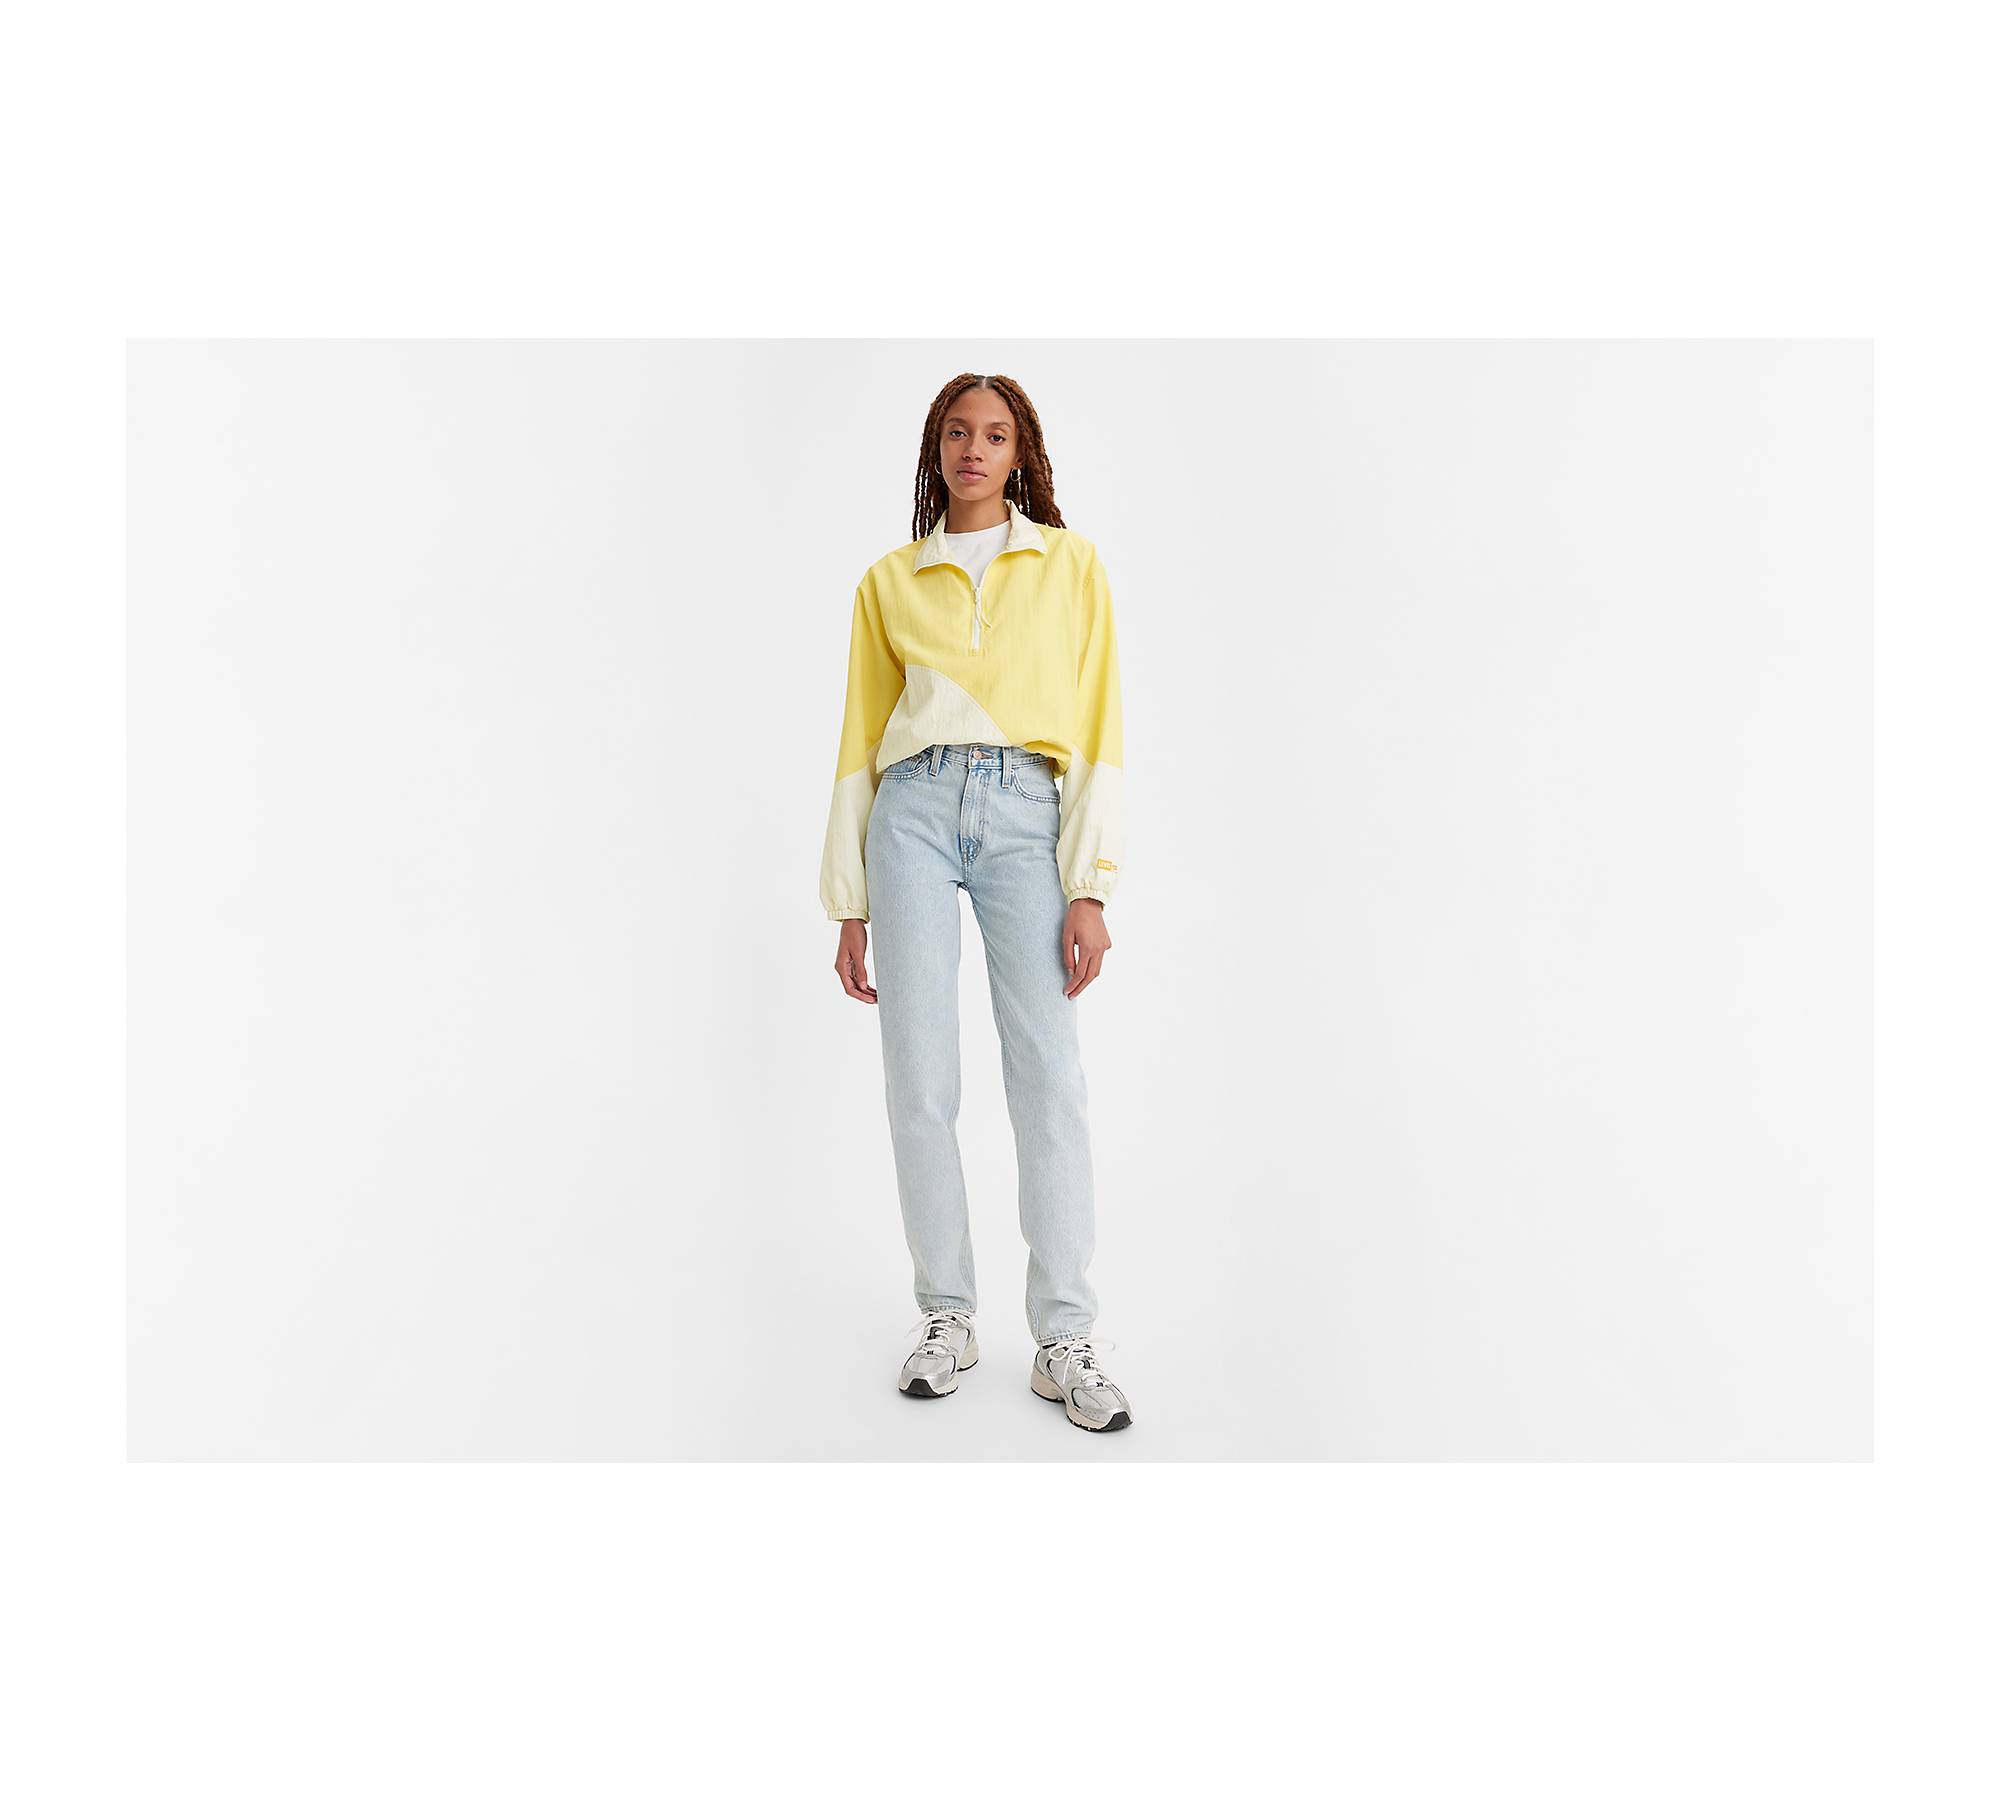 Mom-Approved Fashion: Why Levi's Mom Jeans Are a Must-Have